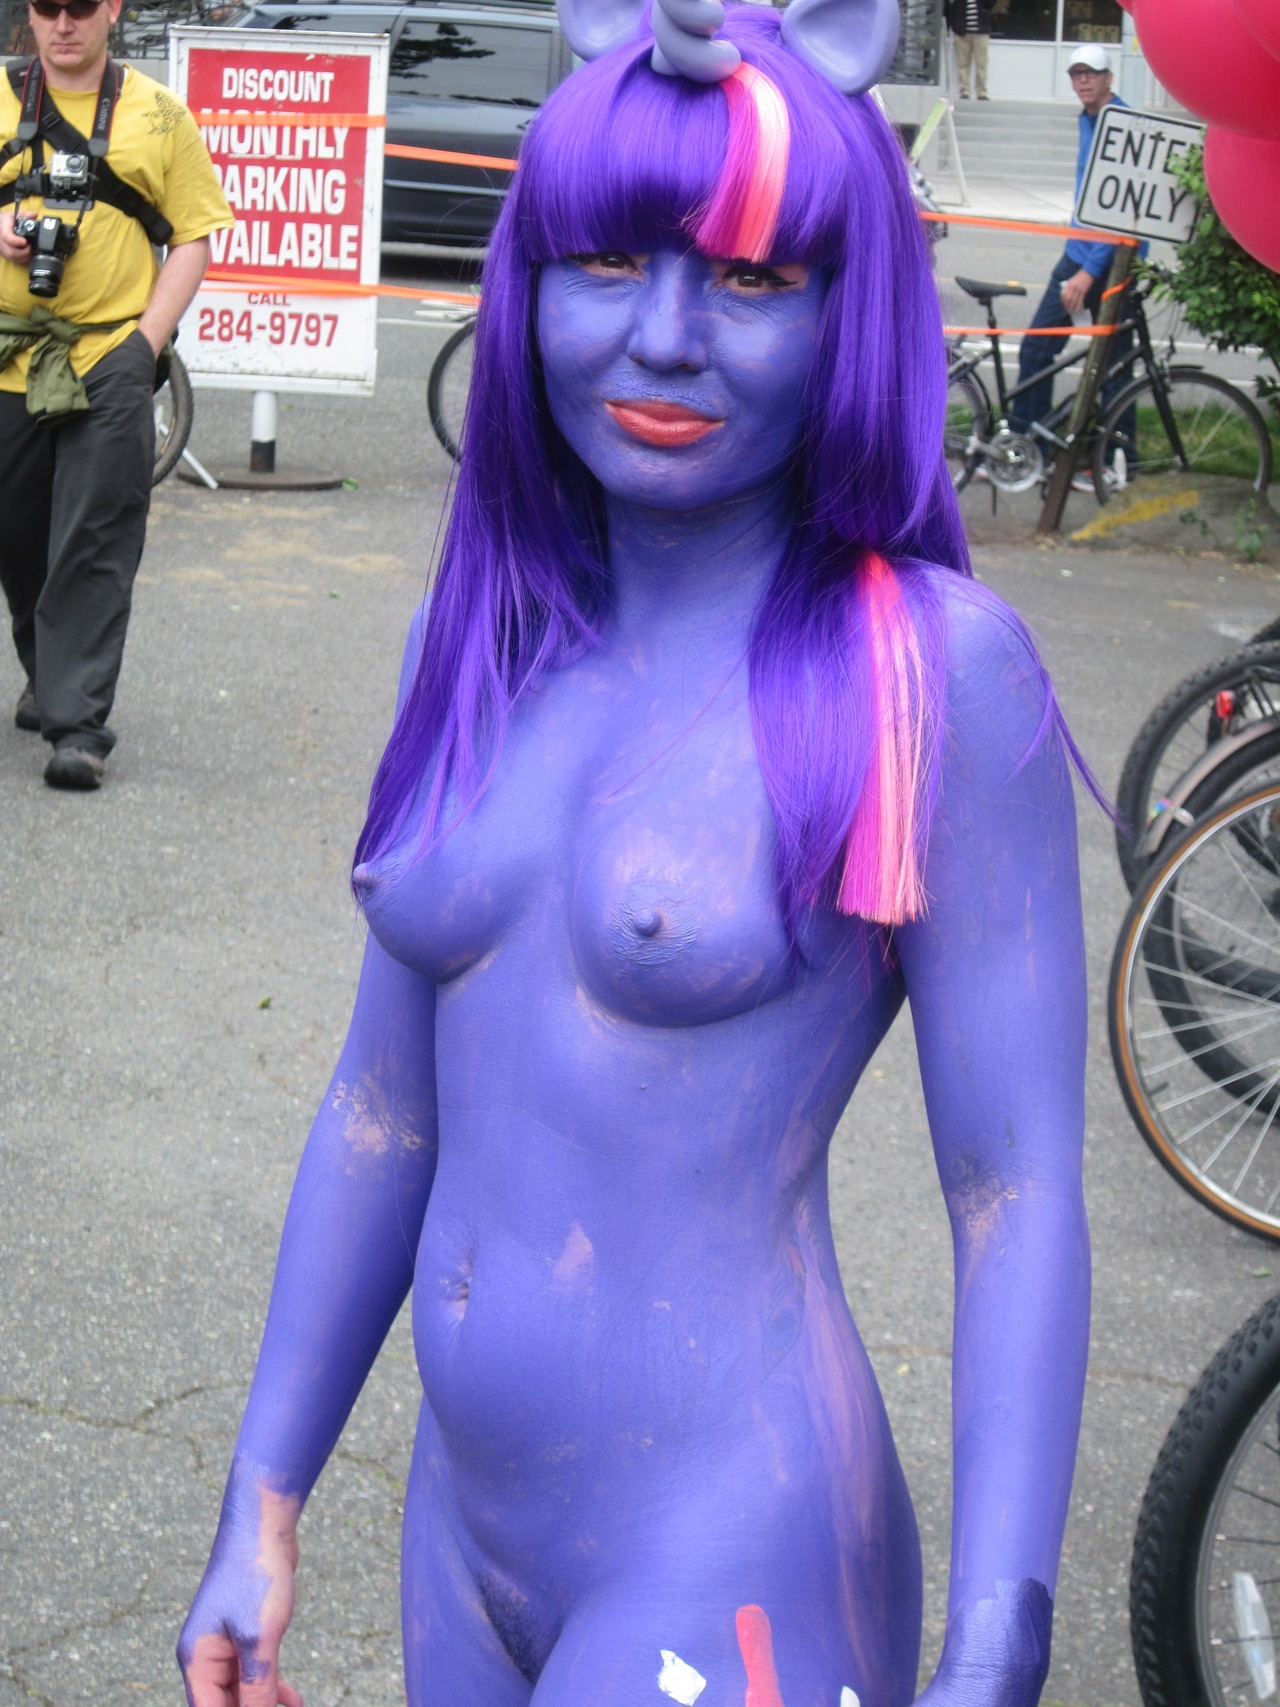 Nude public body painting